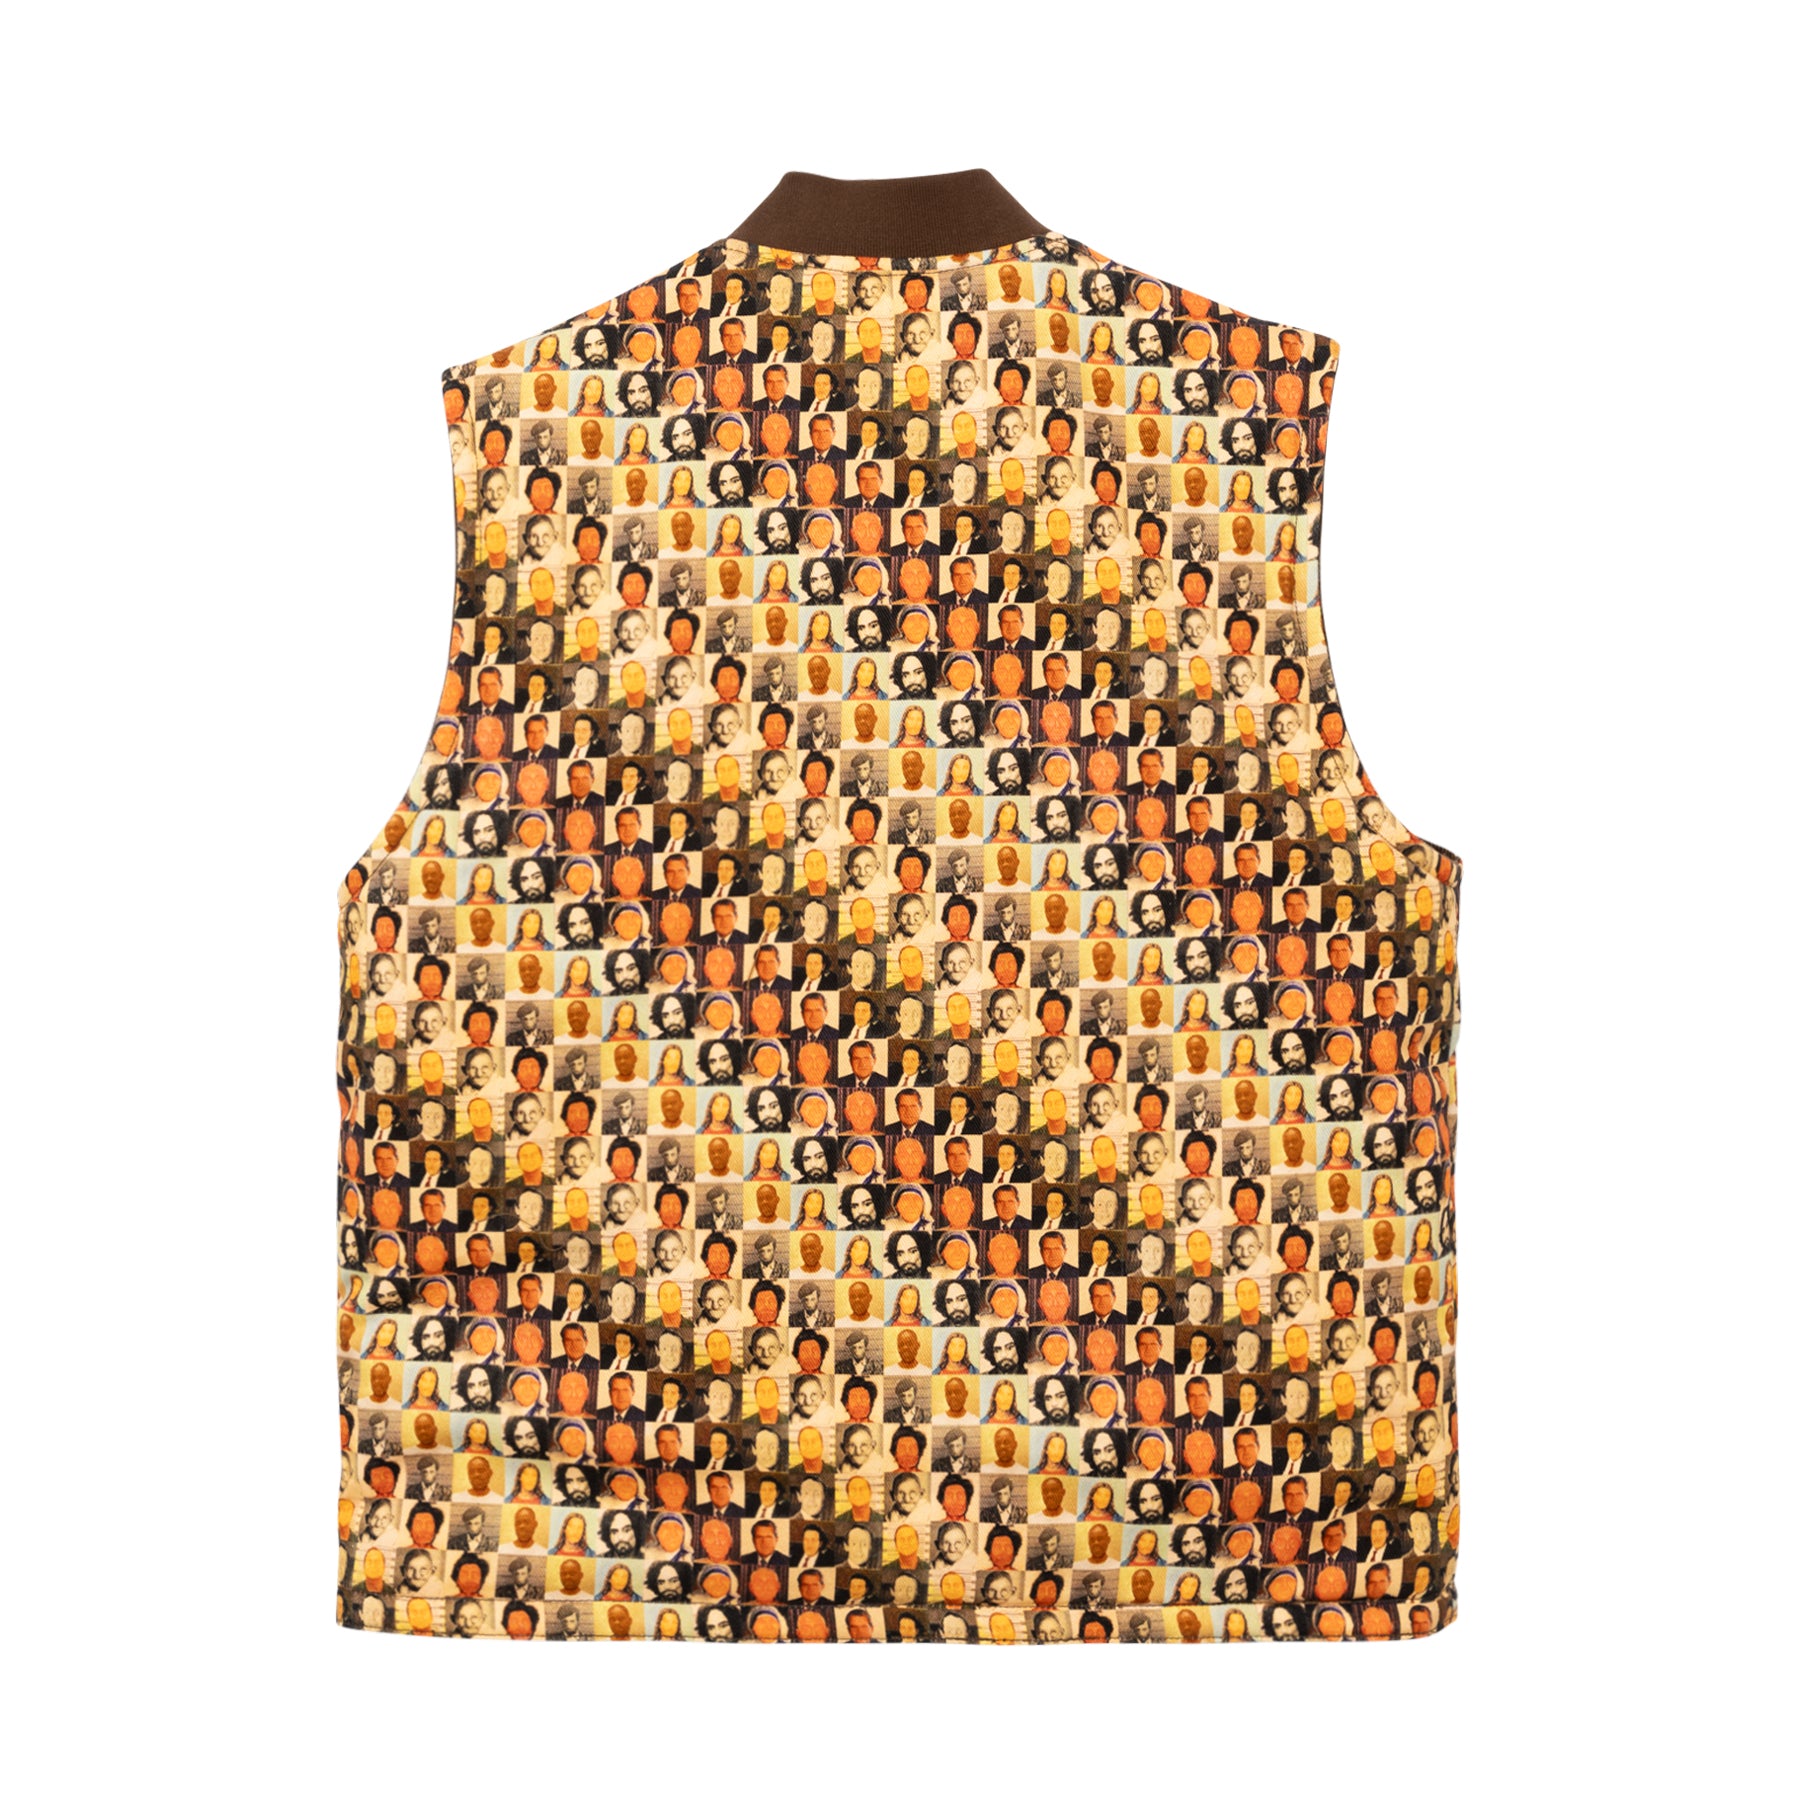 TRIBUTE REVERSIBLE VEST by GOLF WANG